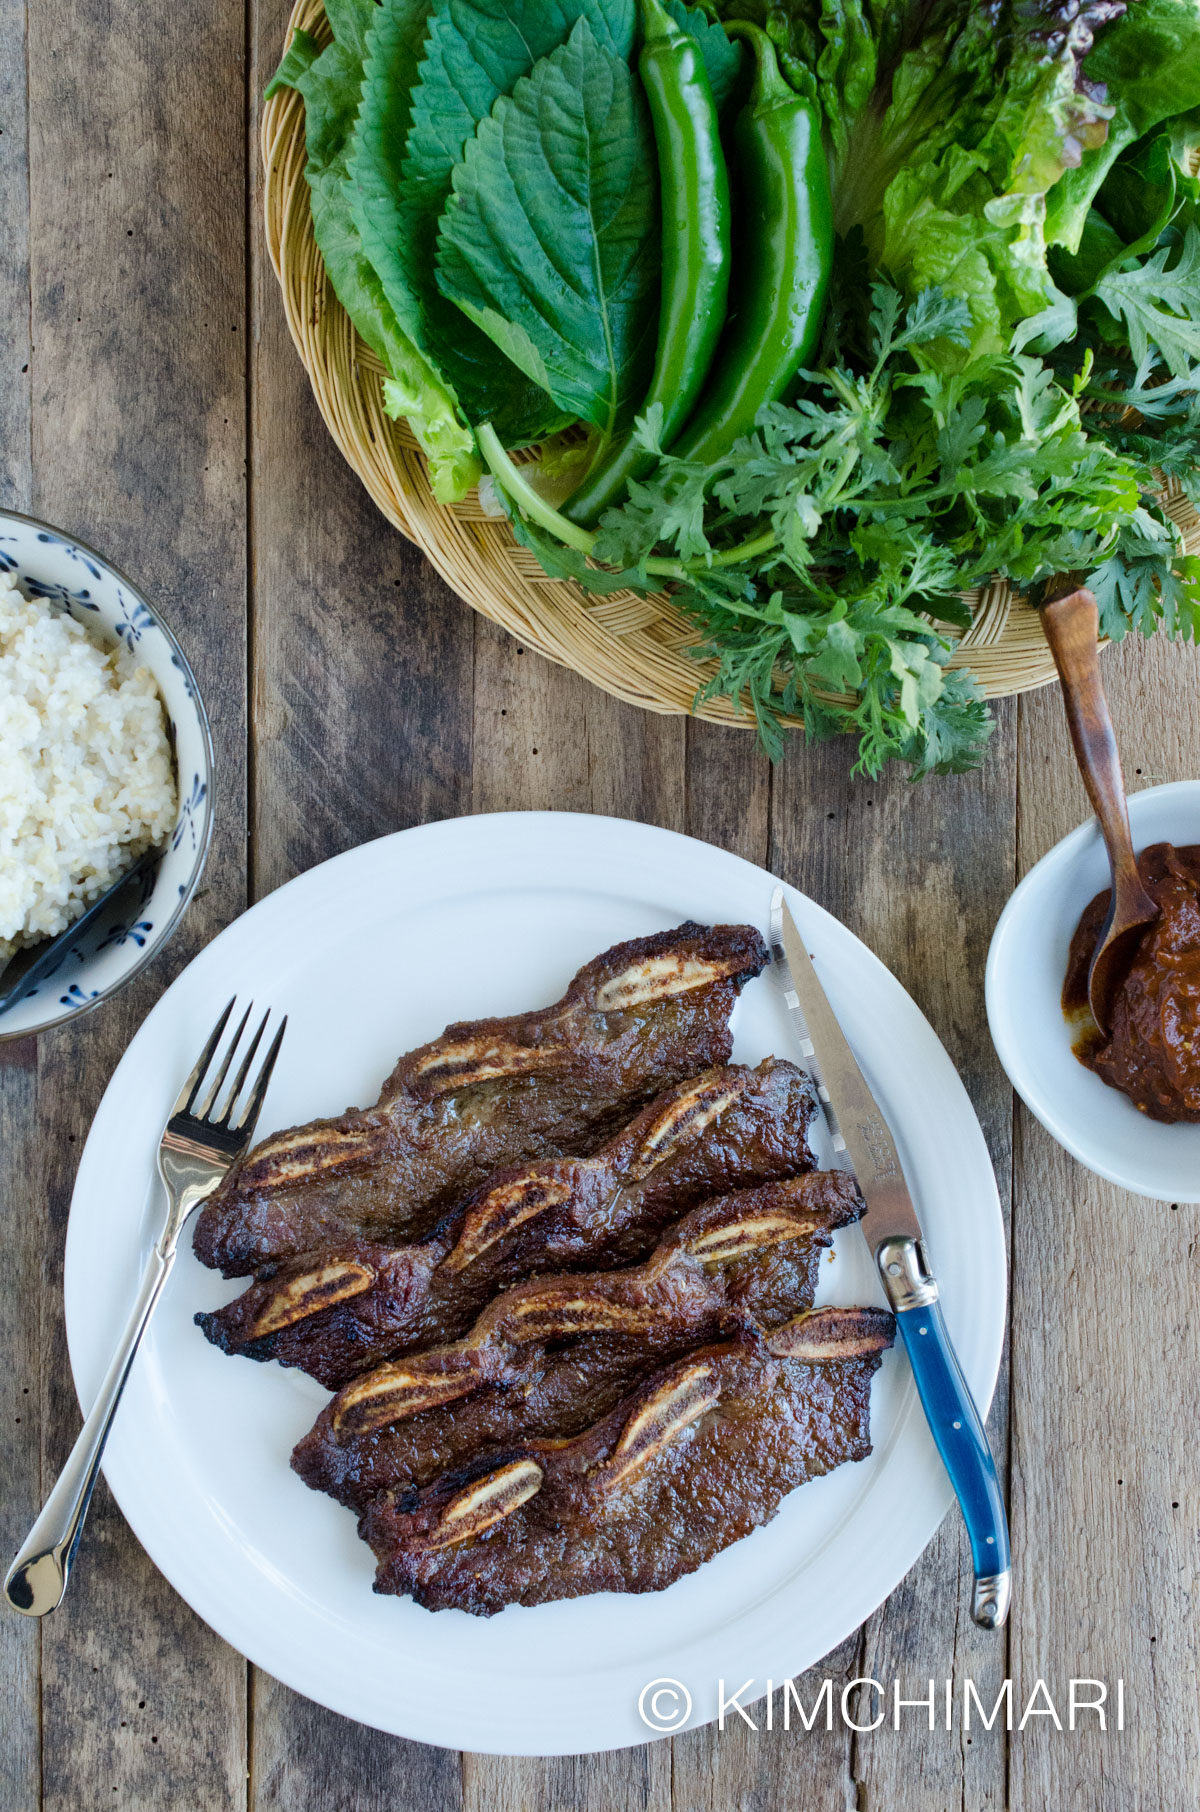 grilled short kalbi ribs on plate with side of ssamjang, ssam greens and rice